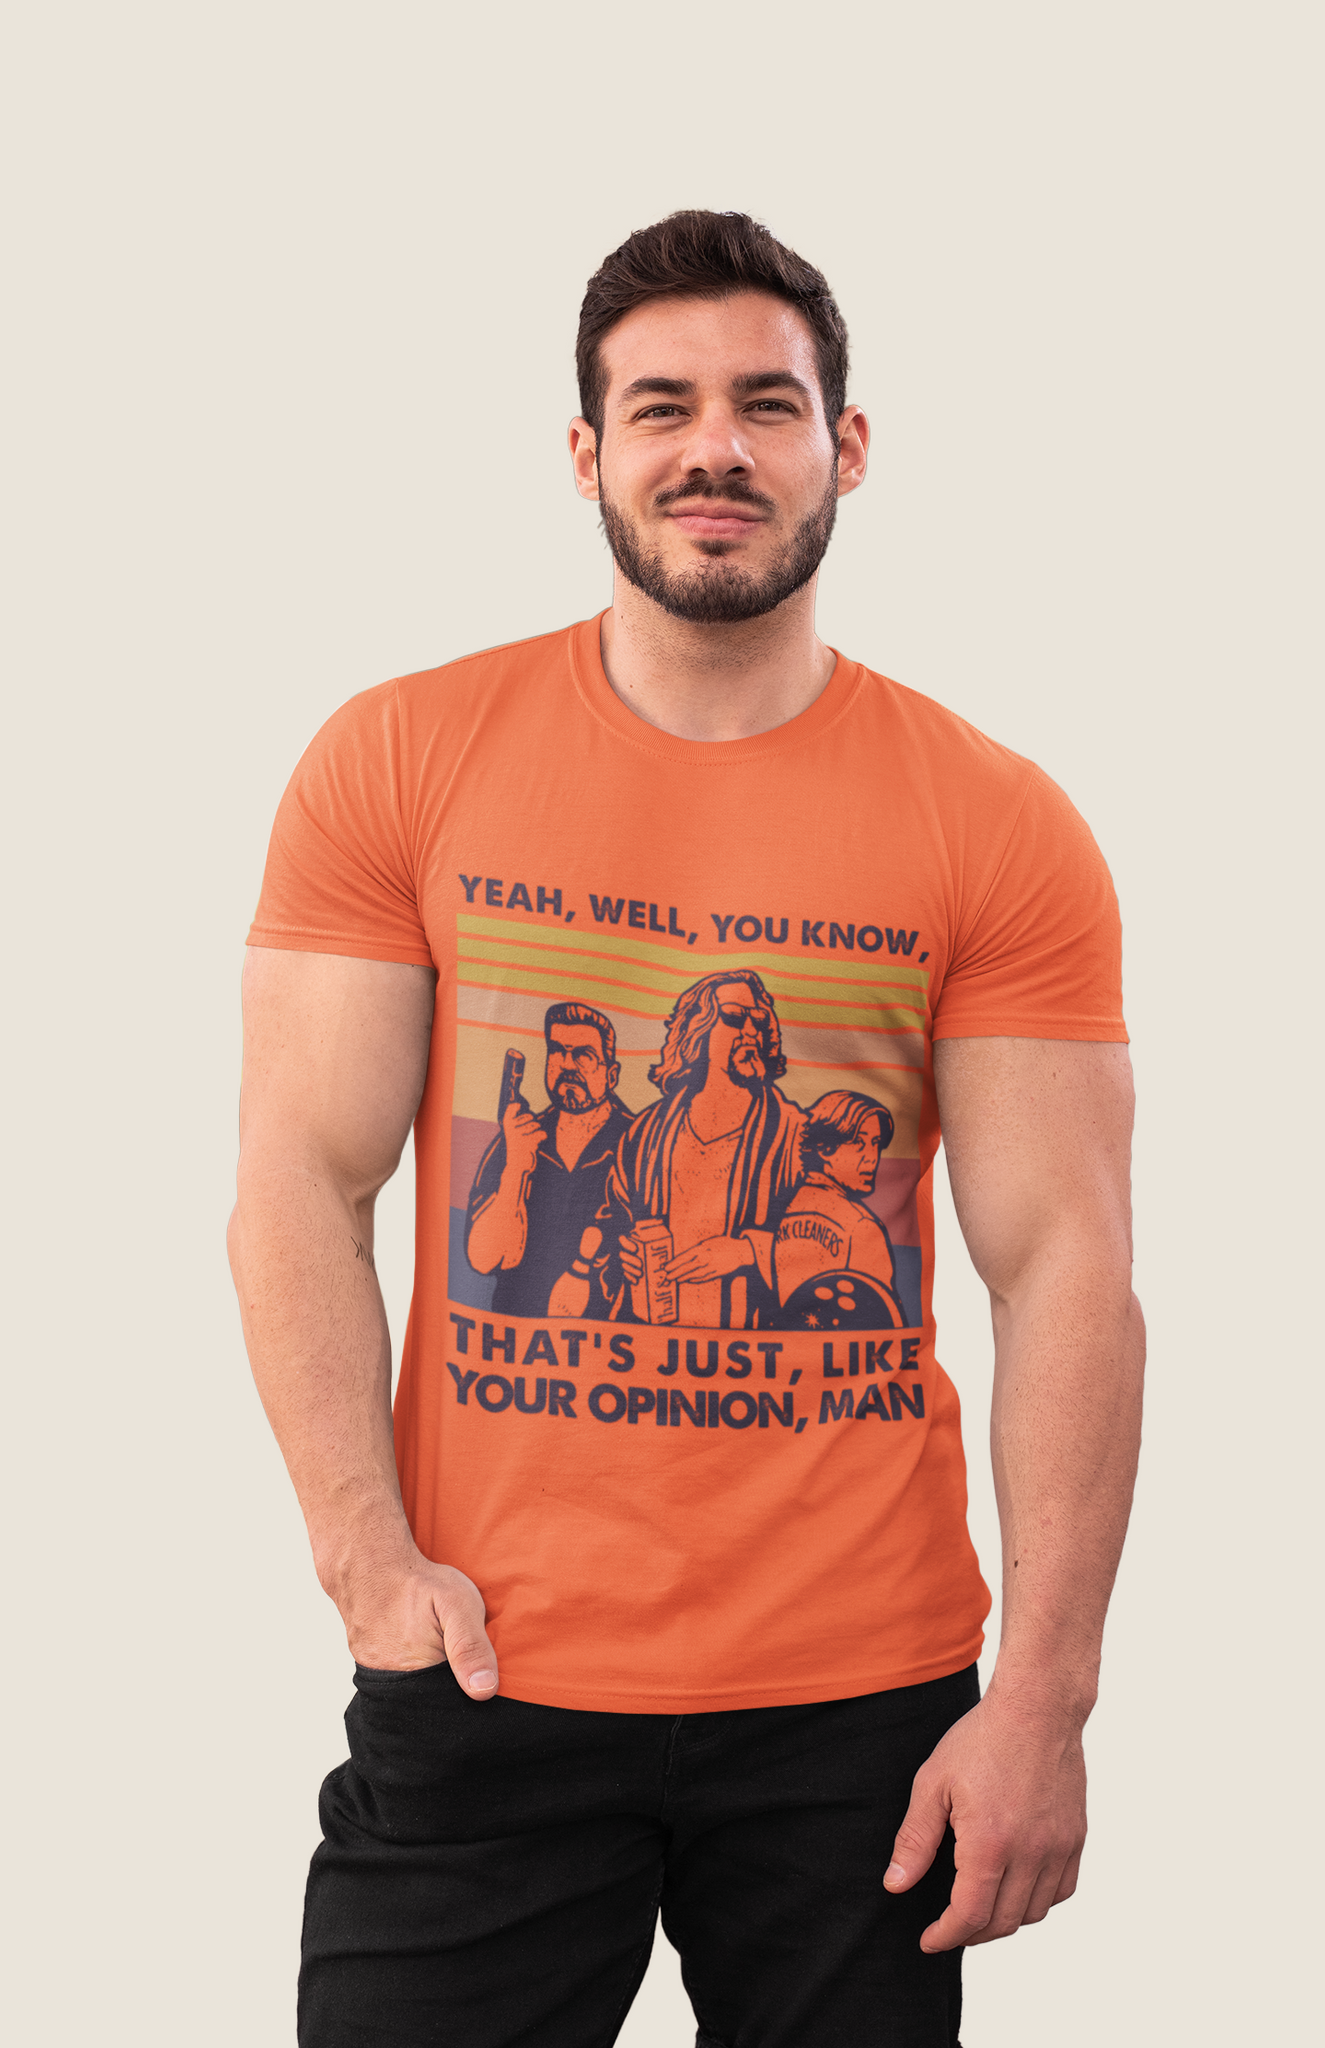 The Big Lebowski T Shirt, The Trio Of Dude Walter Donny T shirt, Yeah Well You Know Vintage Tshirt